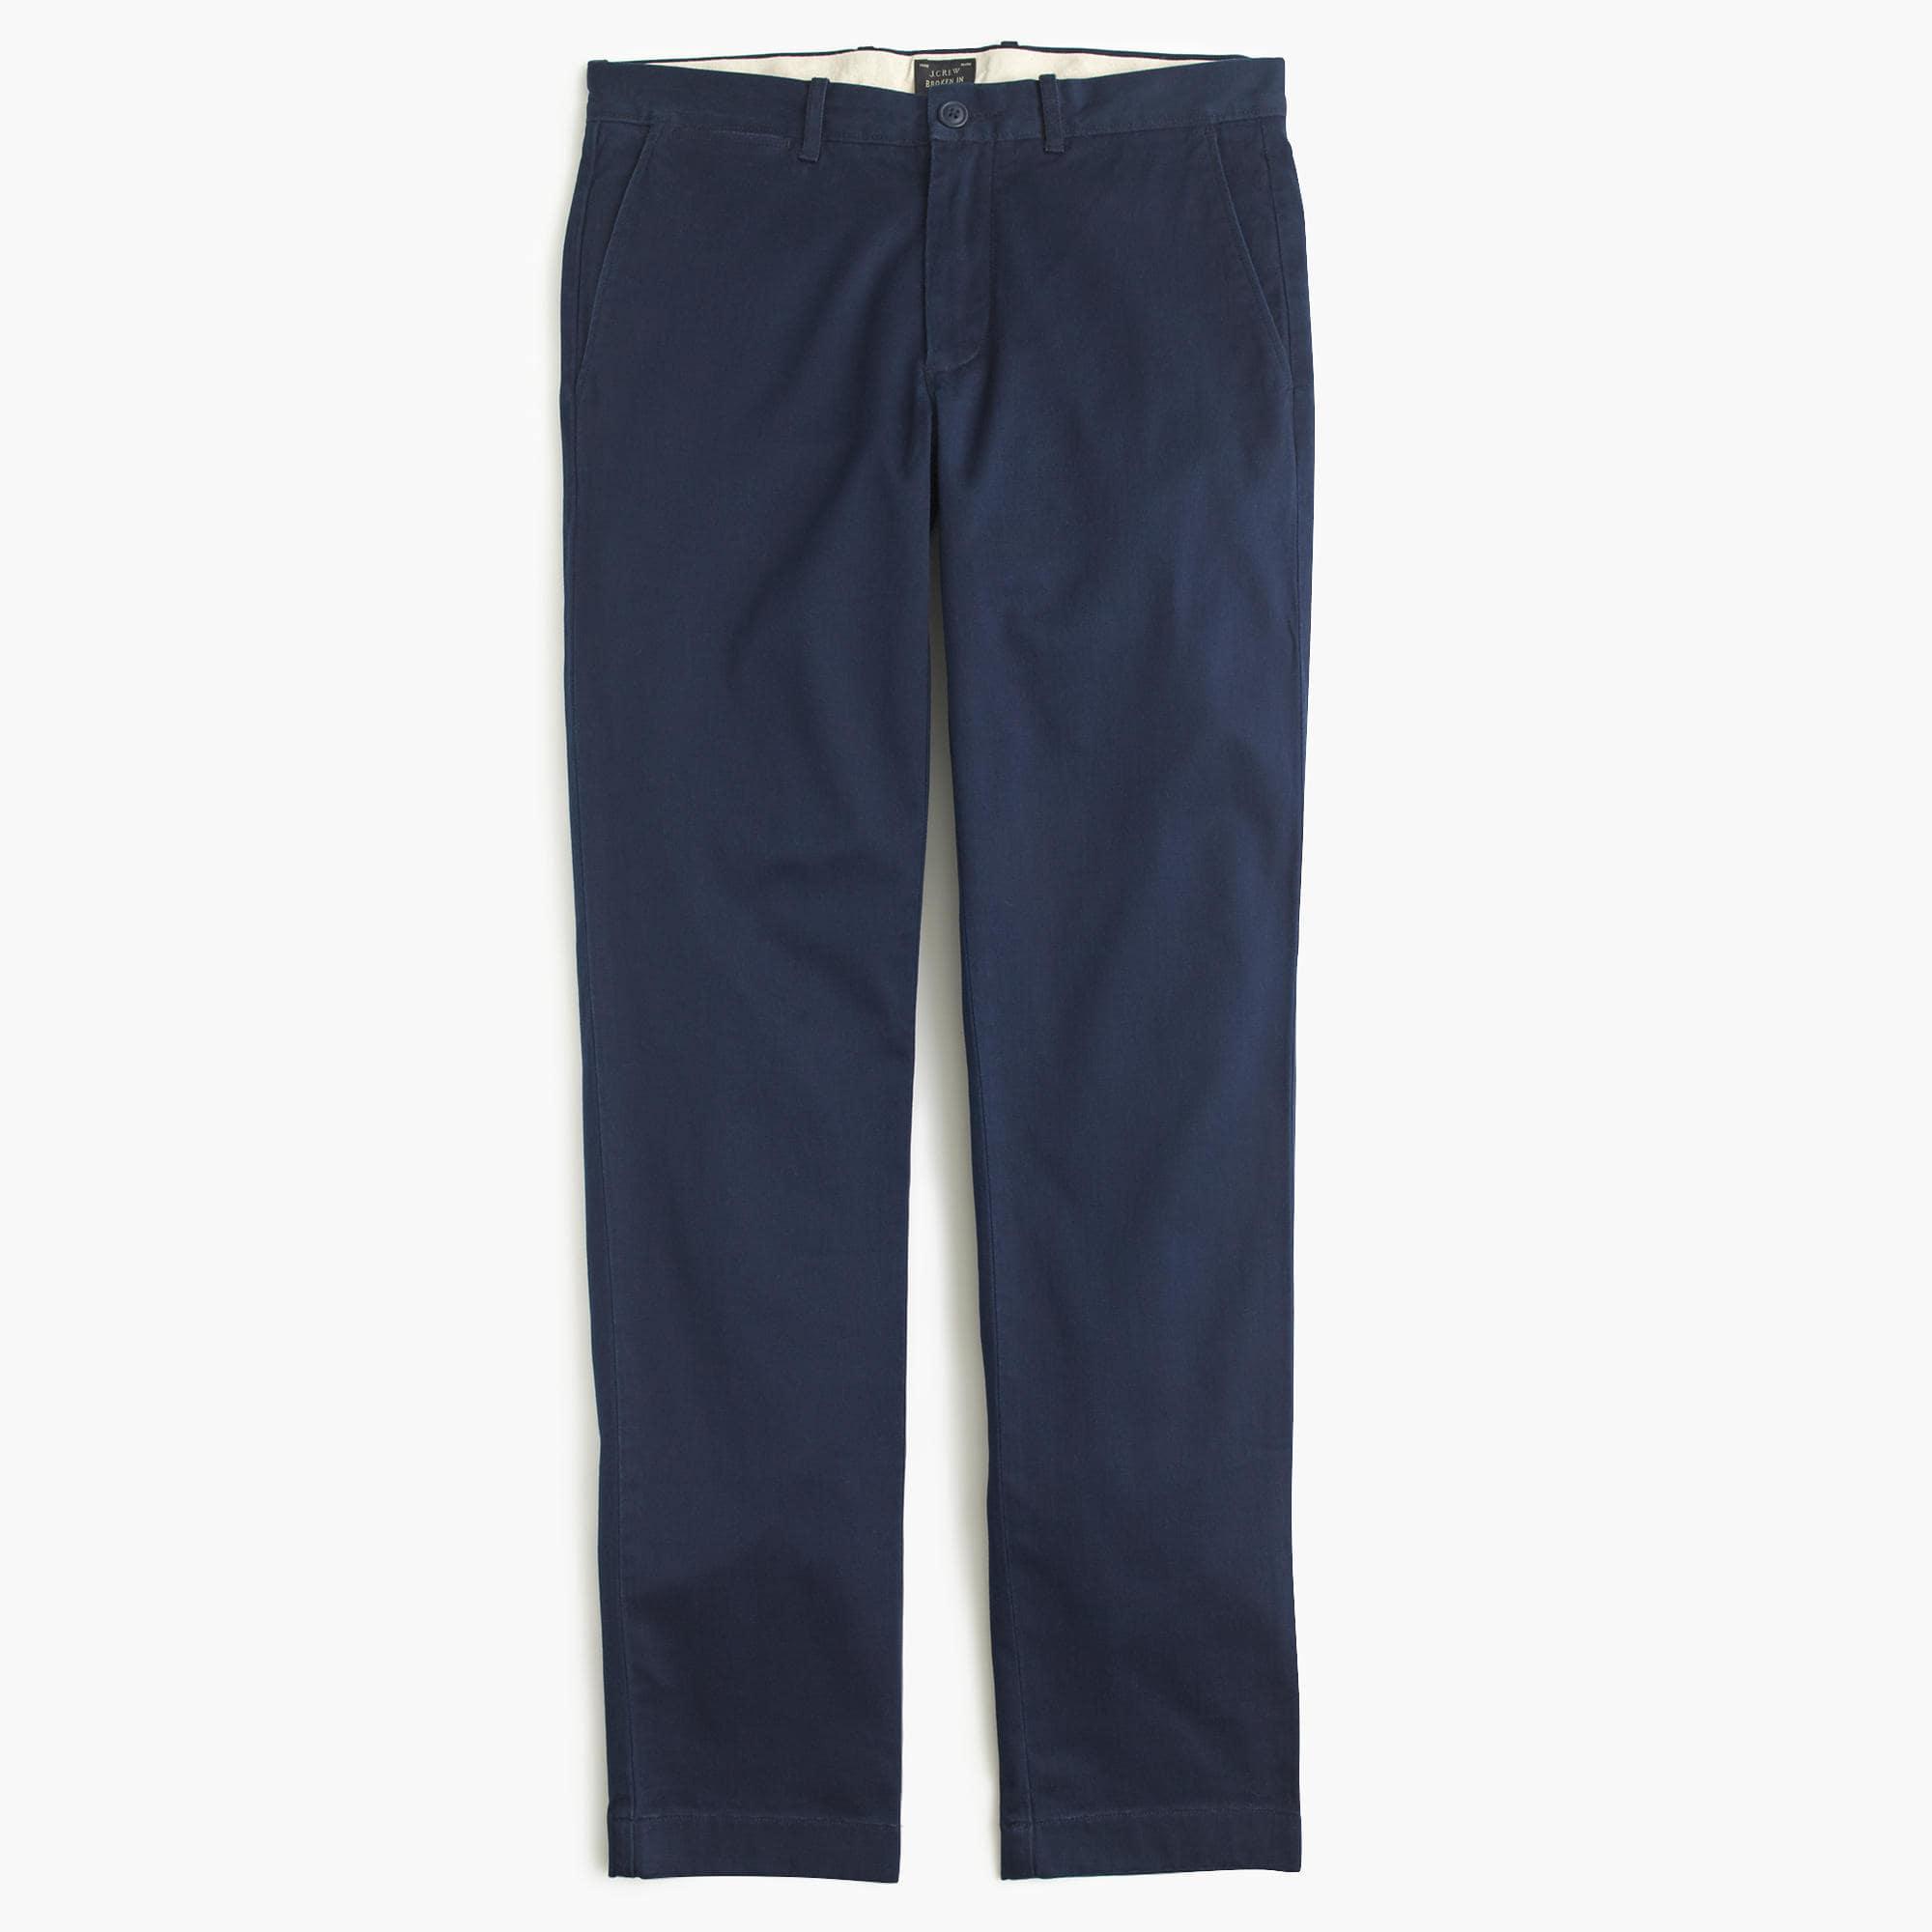 J.Crew Stretch Chino Pant In 770 Straight Fit in Blue for Men - Lyst